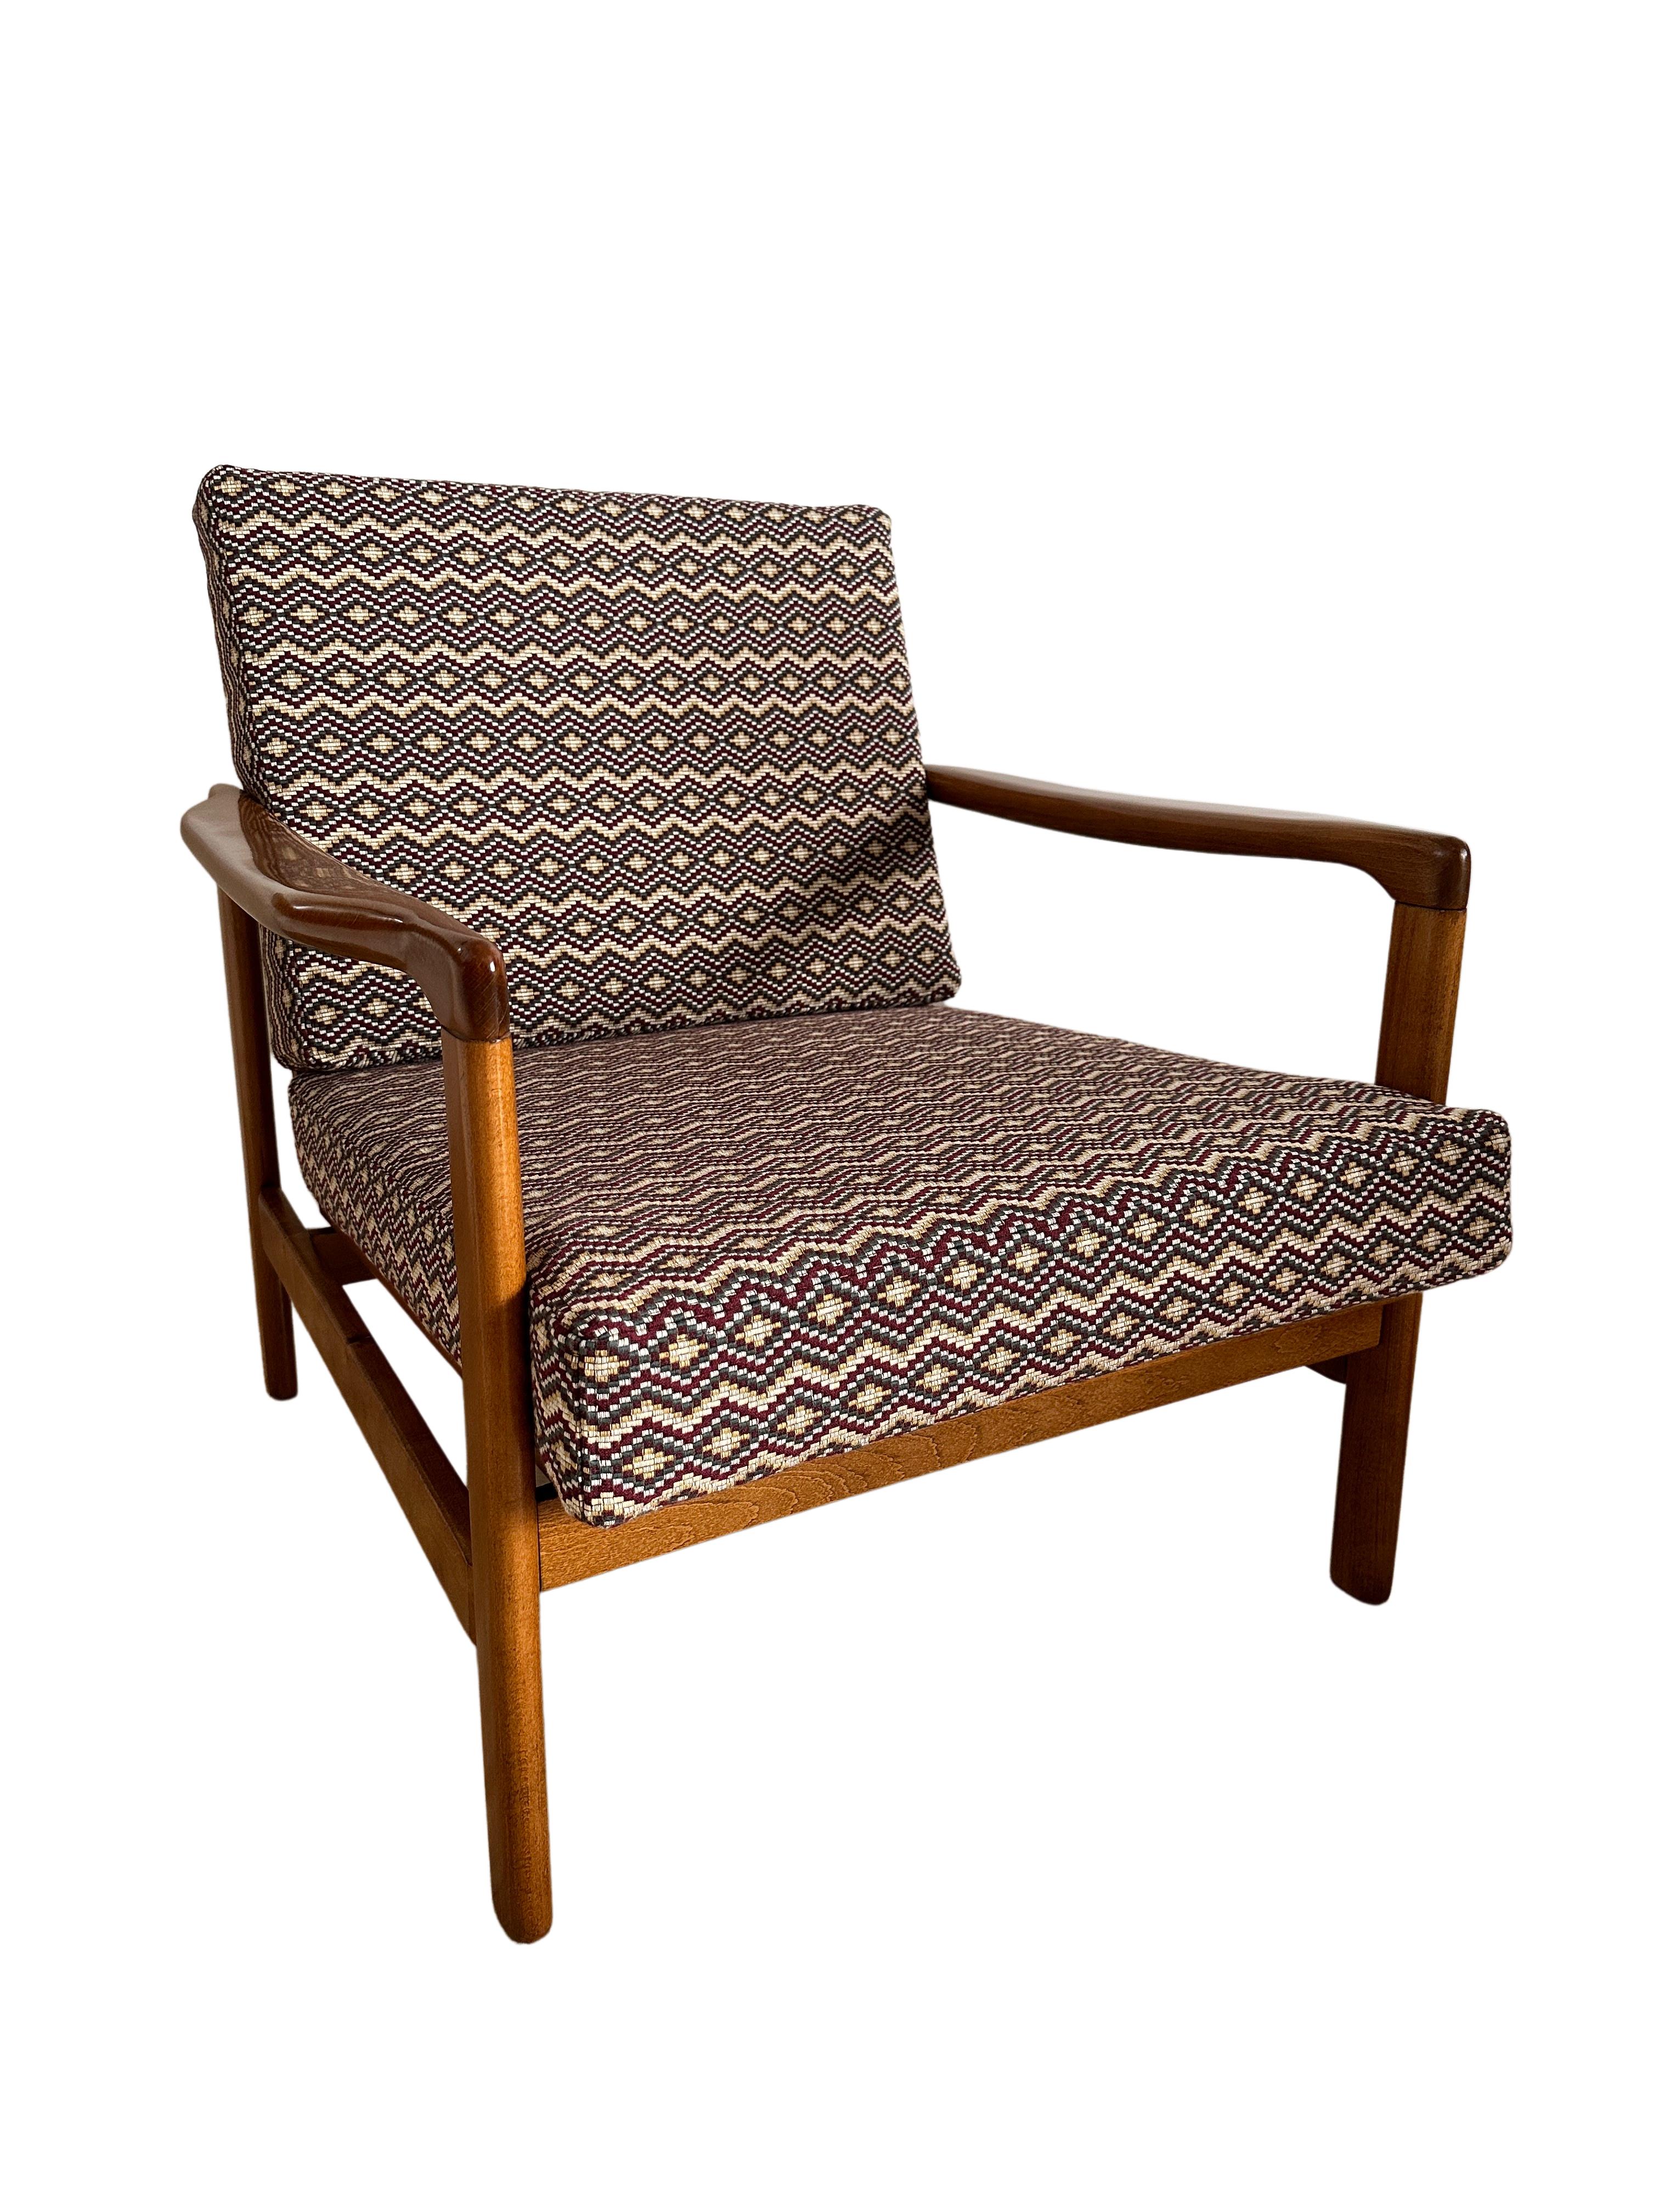 Set of Two Armchairs, Light Wood, Gaston Y Daniela Upholstery, Europe, 1960s For Sale 8